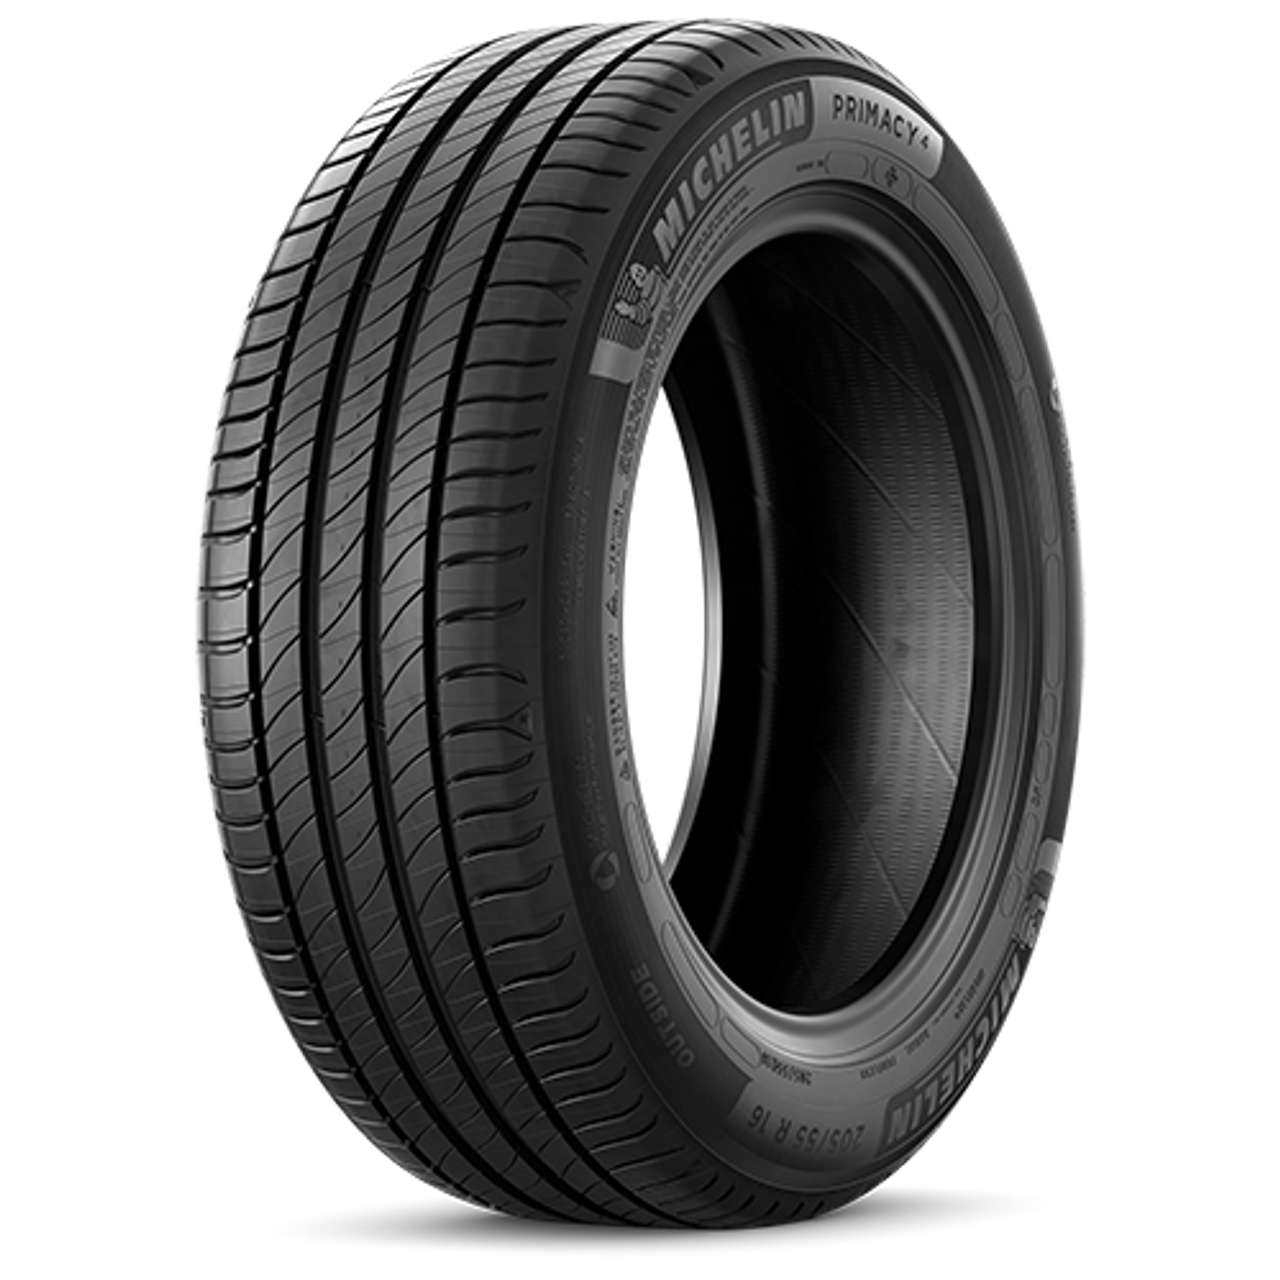 MICHELIN PRIMACY 4+ 175/60R18 85H BSW